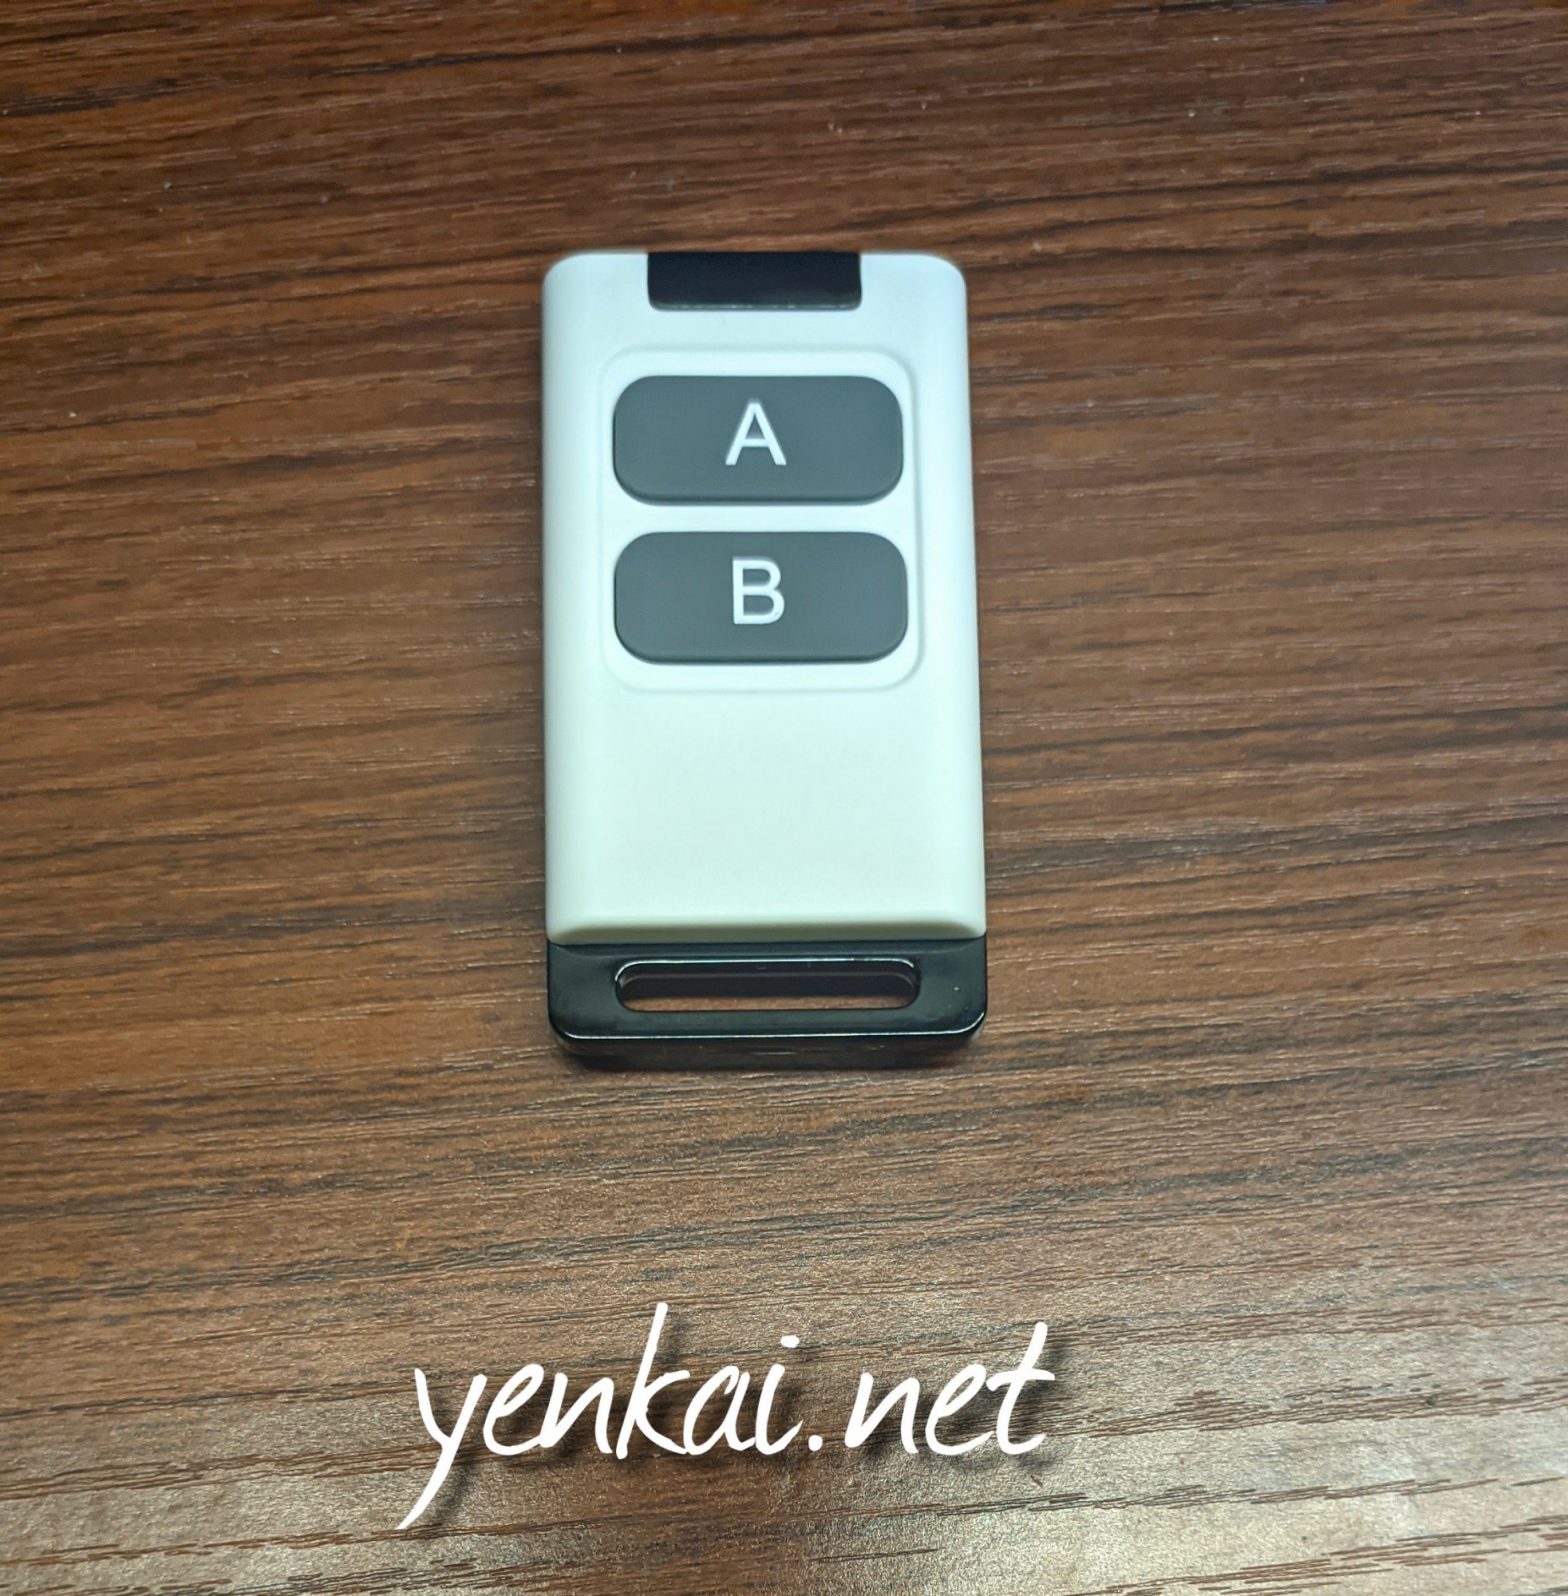 Taobao product recommendation – Remote control duplicator